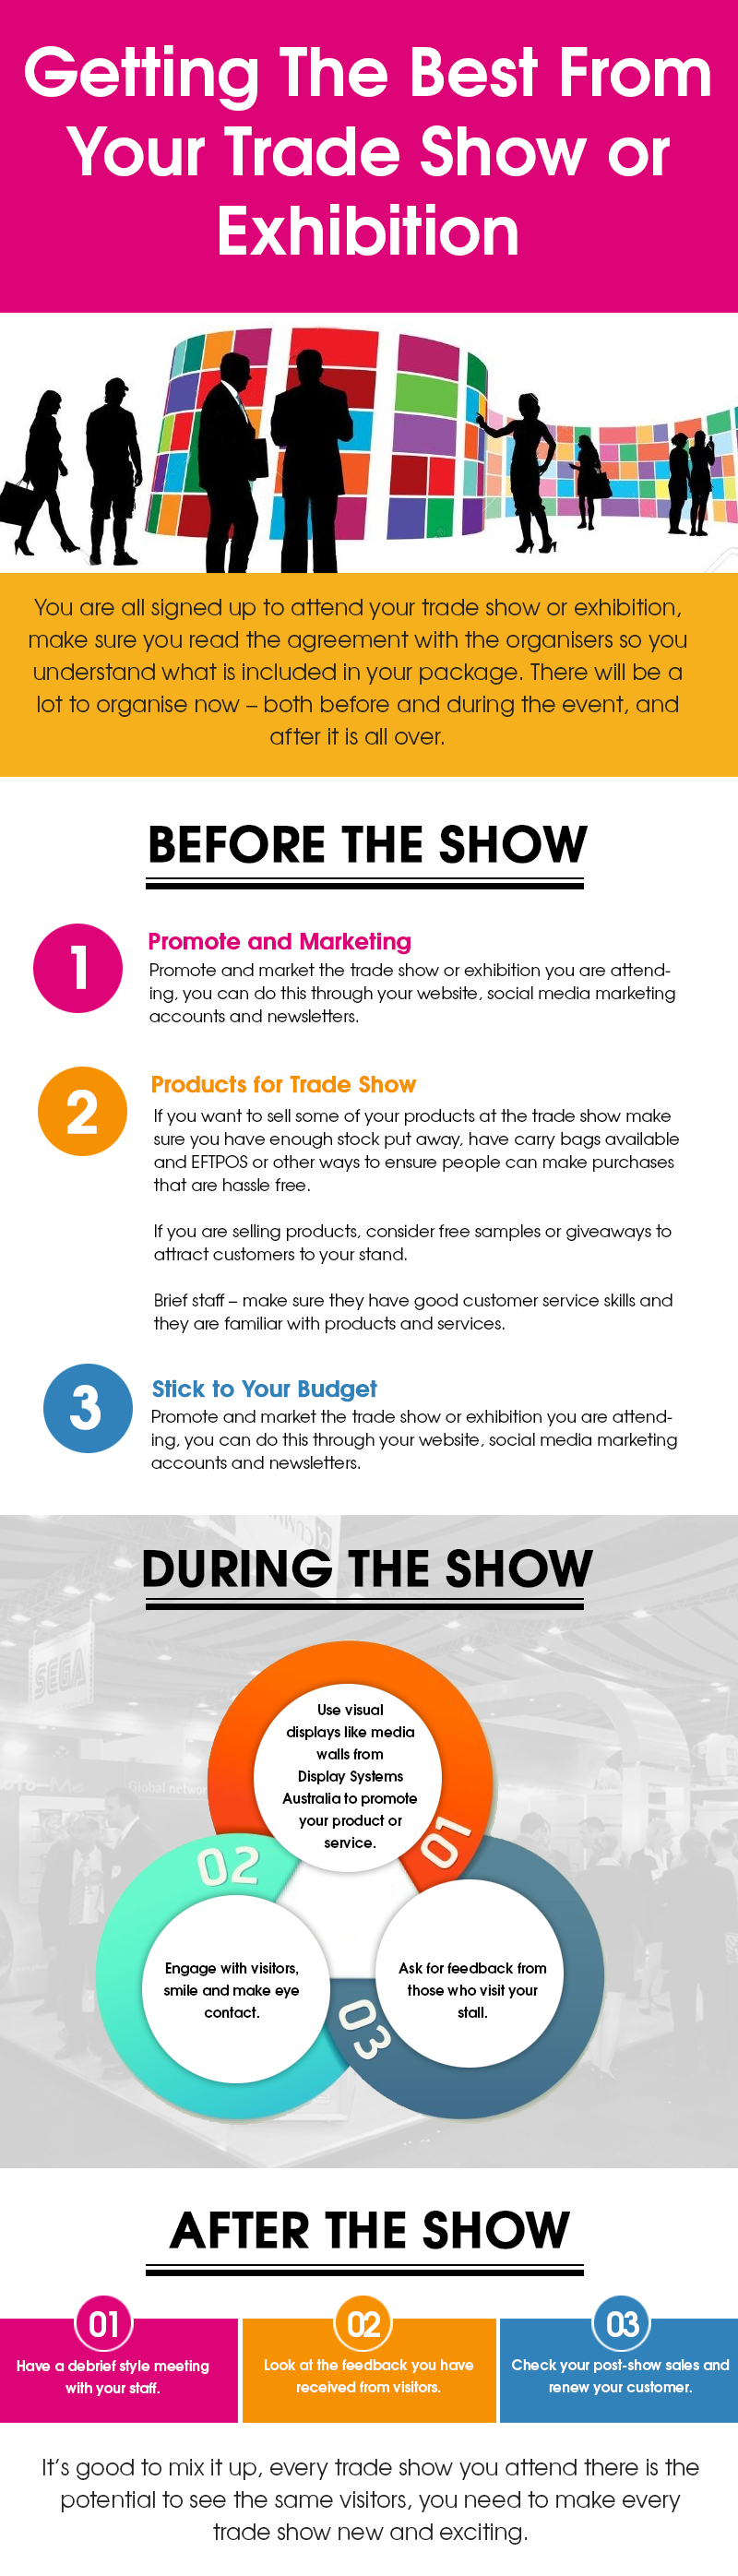 Getting The Best From Your Trade Show or Exhibition